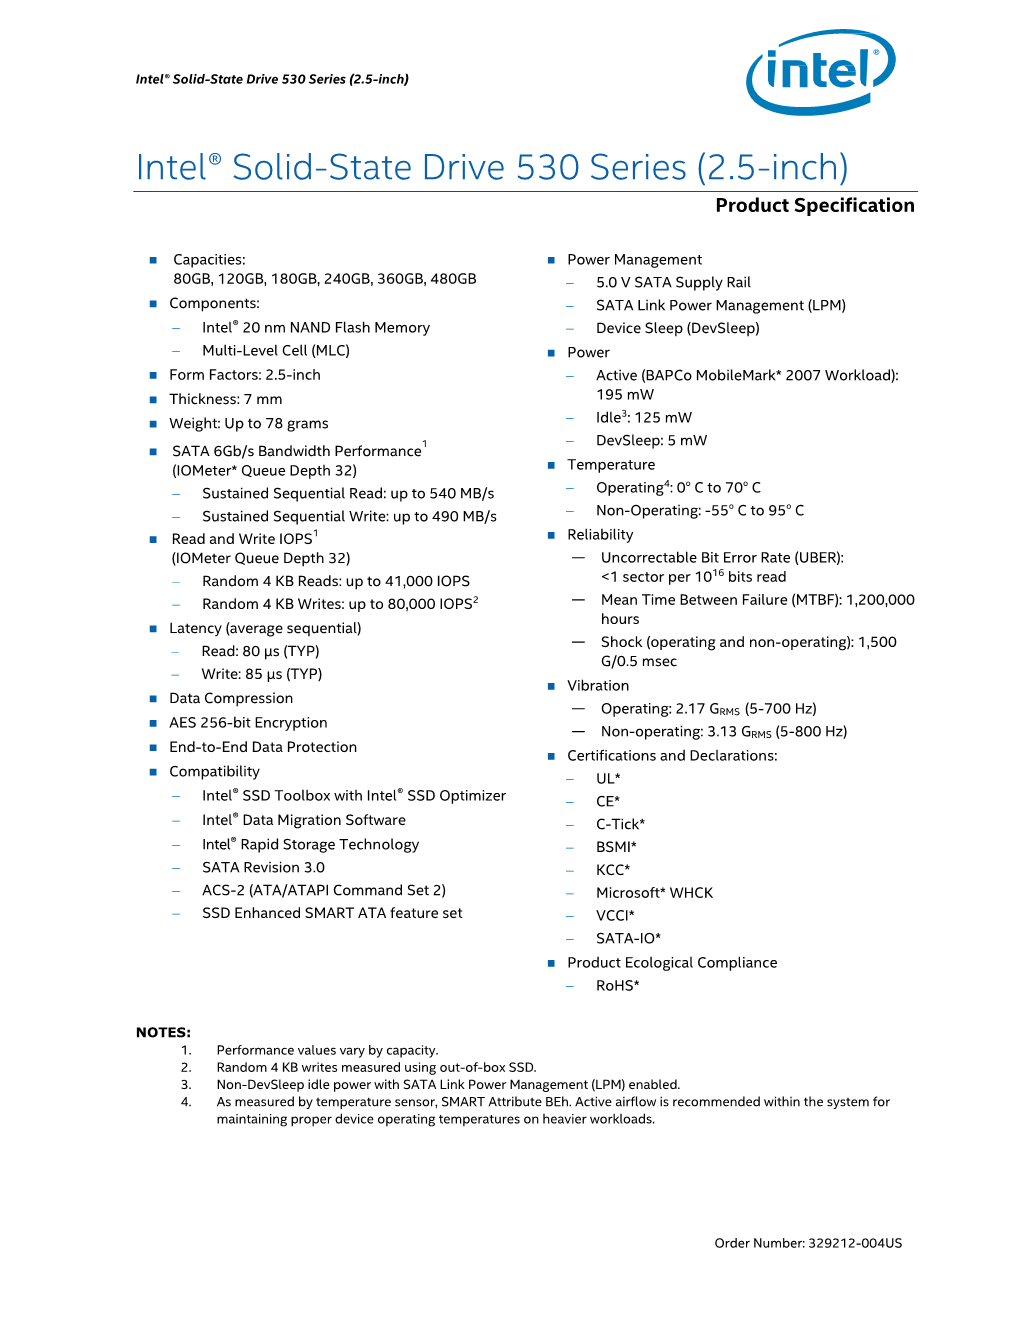 Intel® Solid-State Drive 530 Series (2.5-Inch) Product Specification